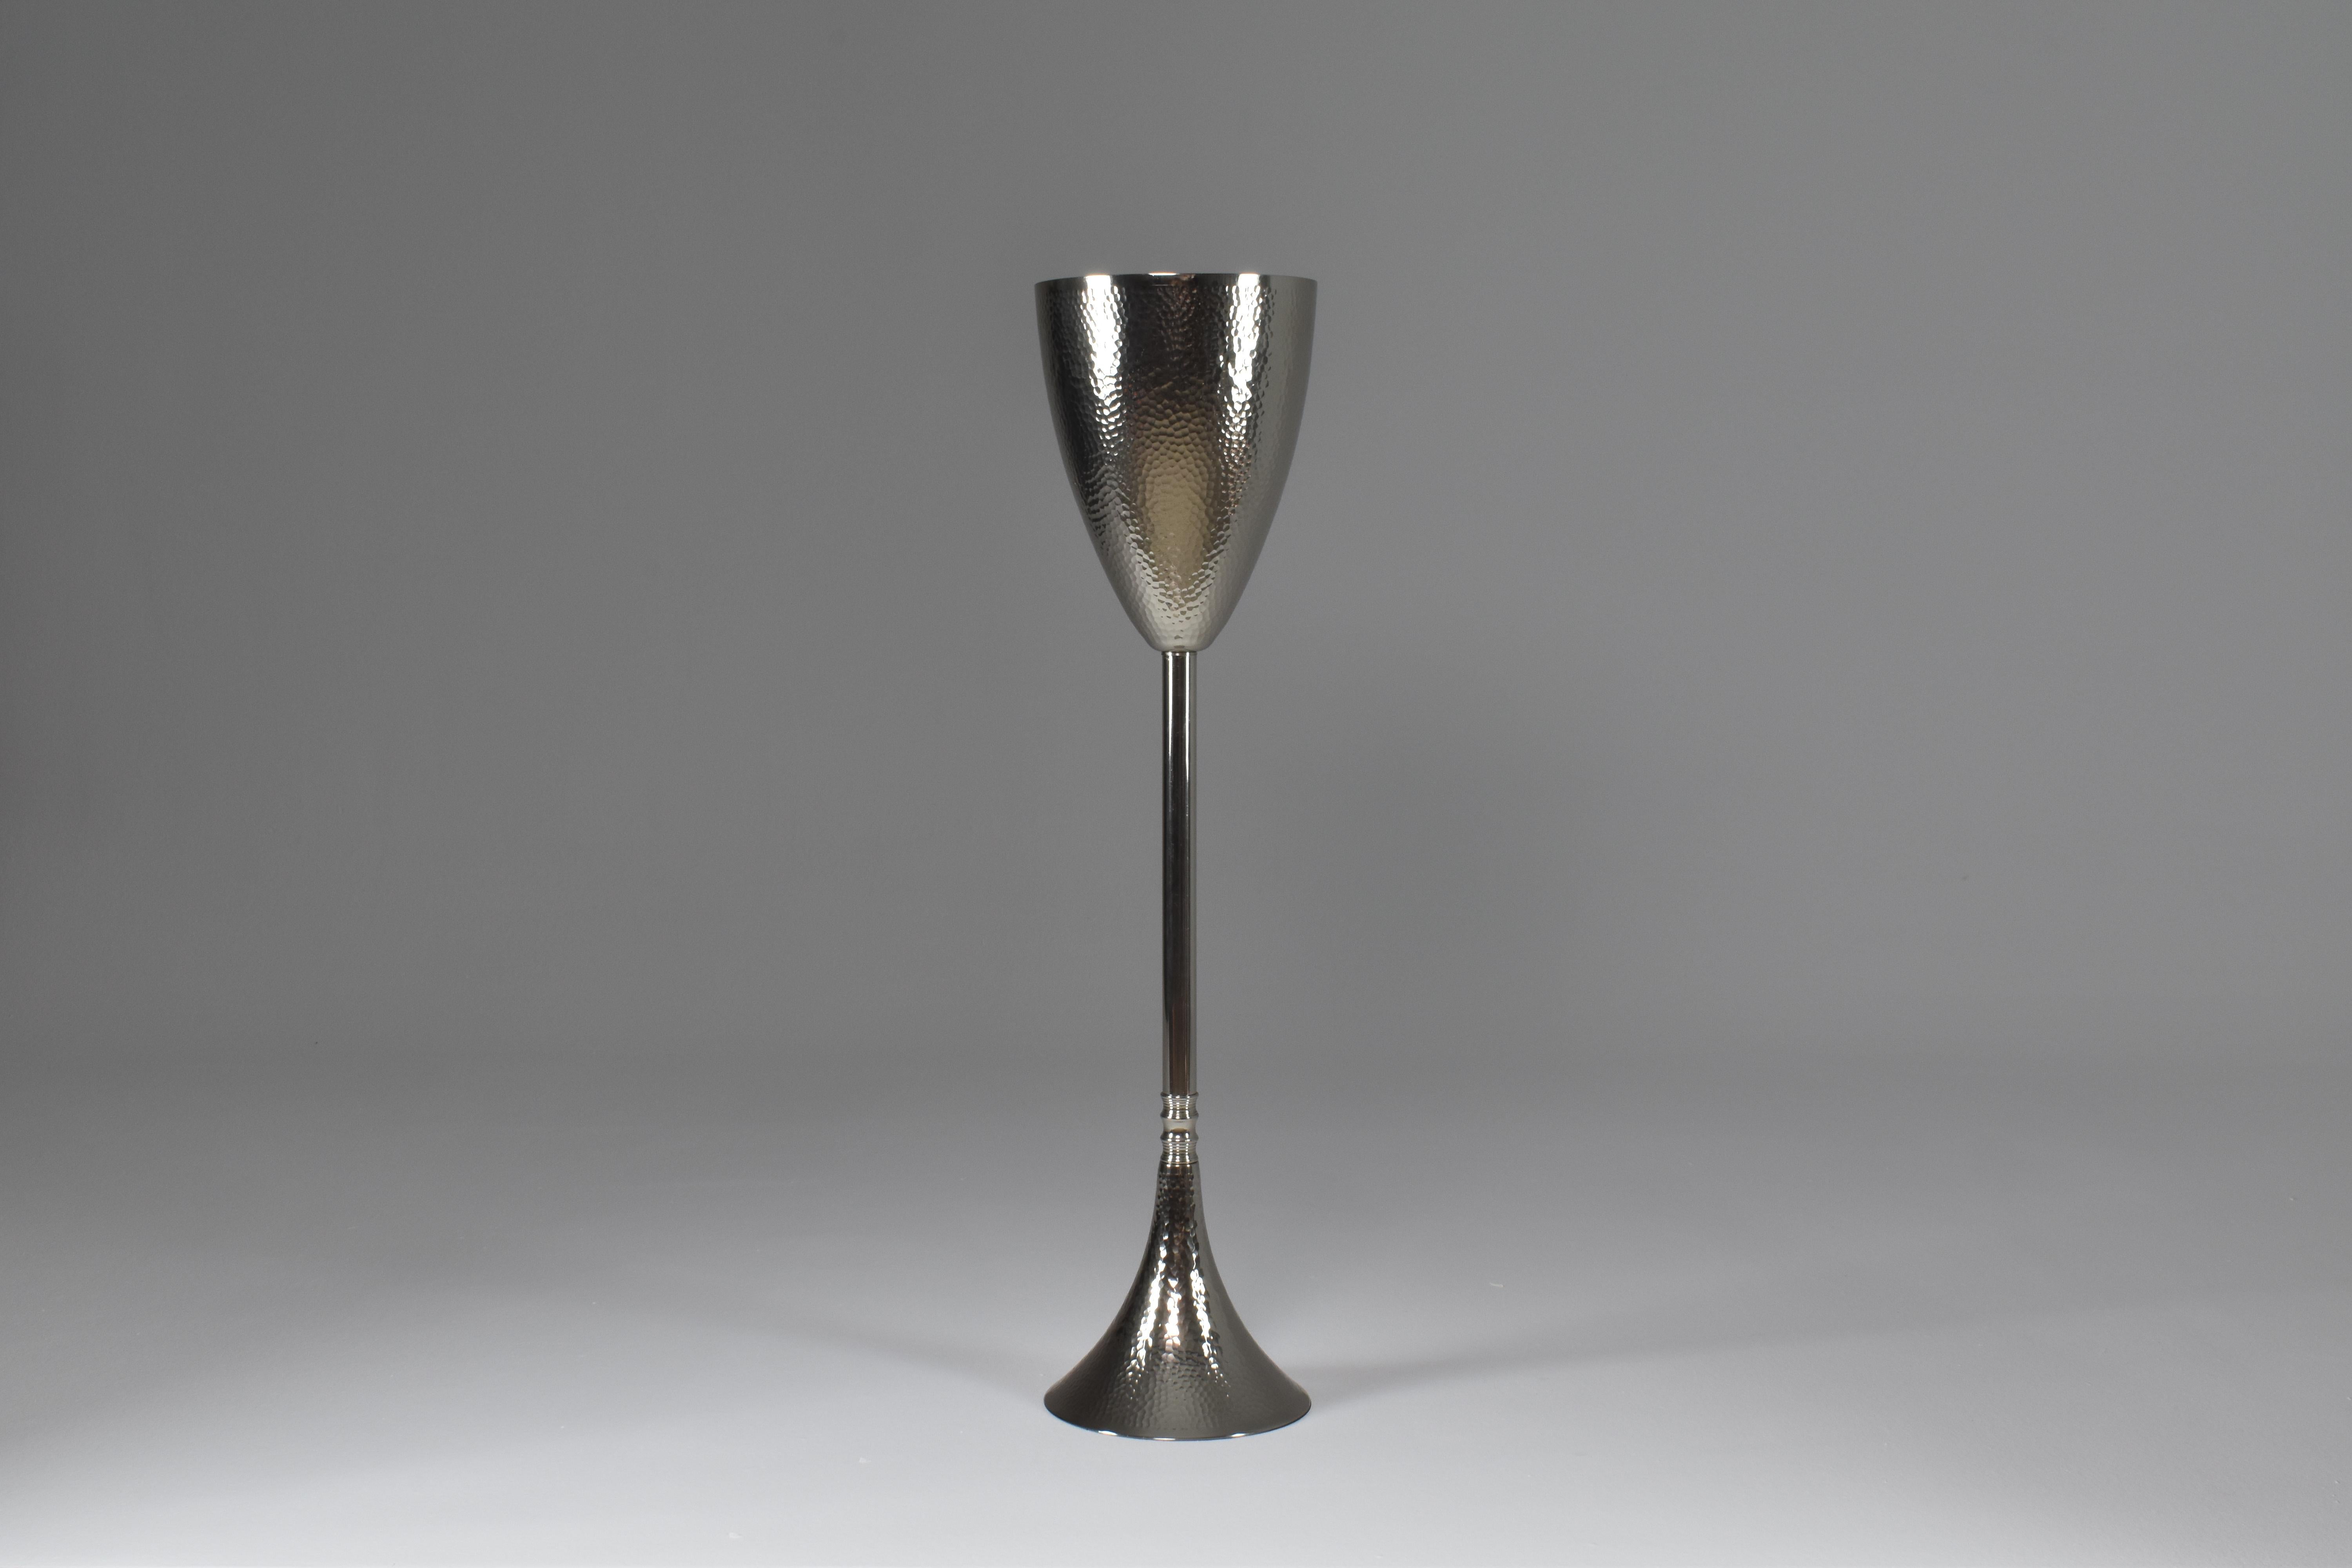 Contemporary made-to-measure handcrafted nickel-plated brass champagne or wine bucket stand with skillfully sculpted and handmade hammered details.
Designed by Jonathan Amar, handcrafted at his atelier in Rabat. 

A standout accessory for high-end